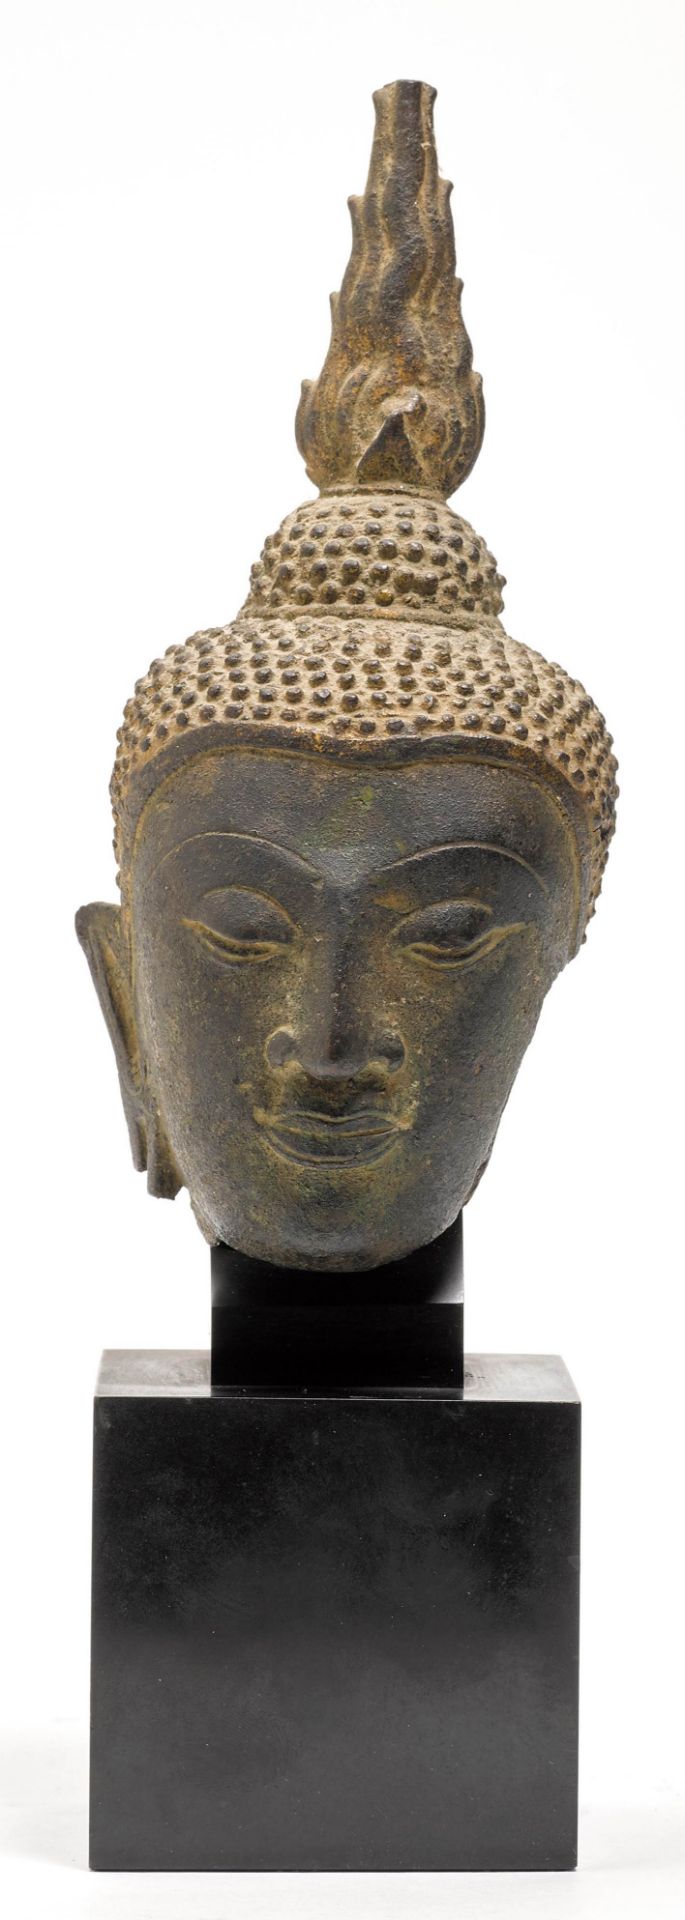 A SMALL BUT FINE BRONZE HEAD OF BUDDHA. - Image 2 of 4